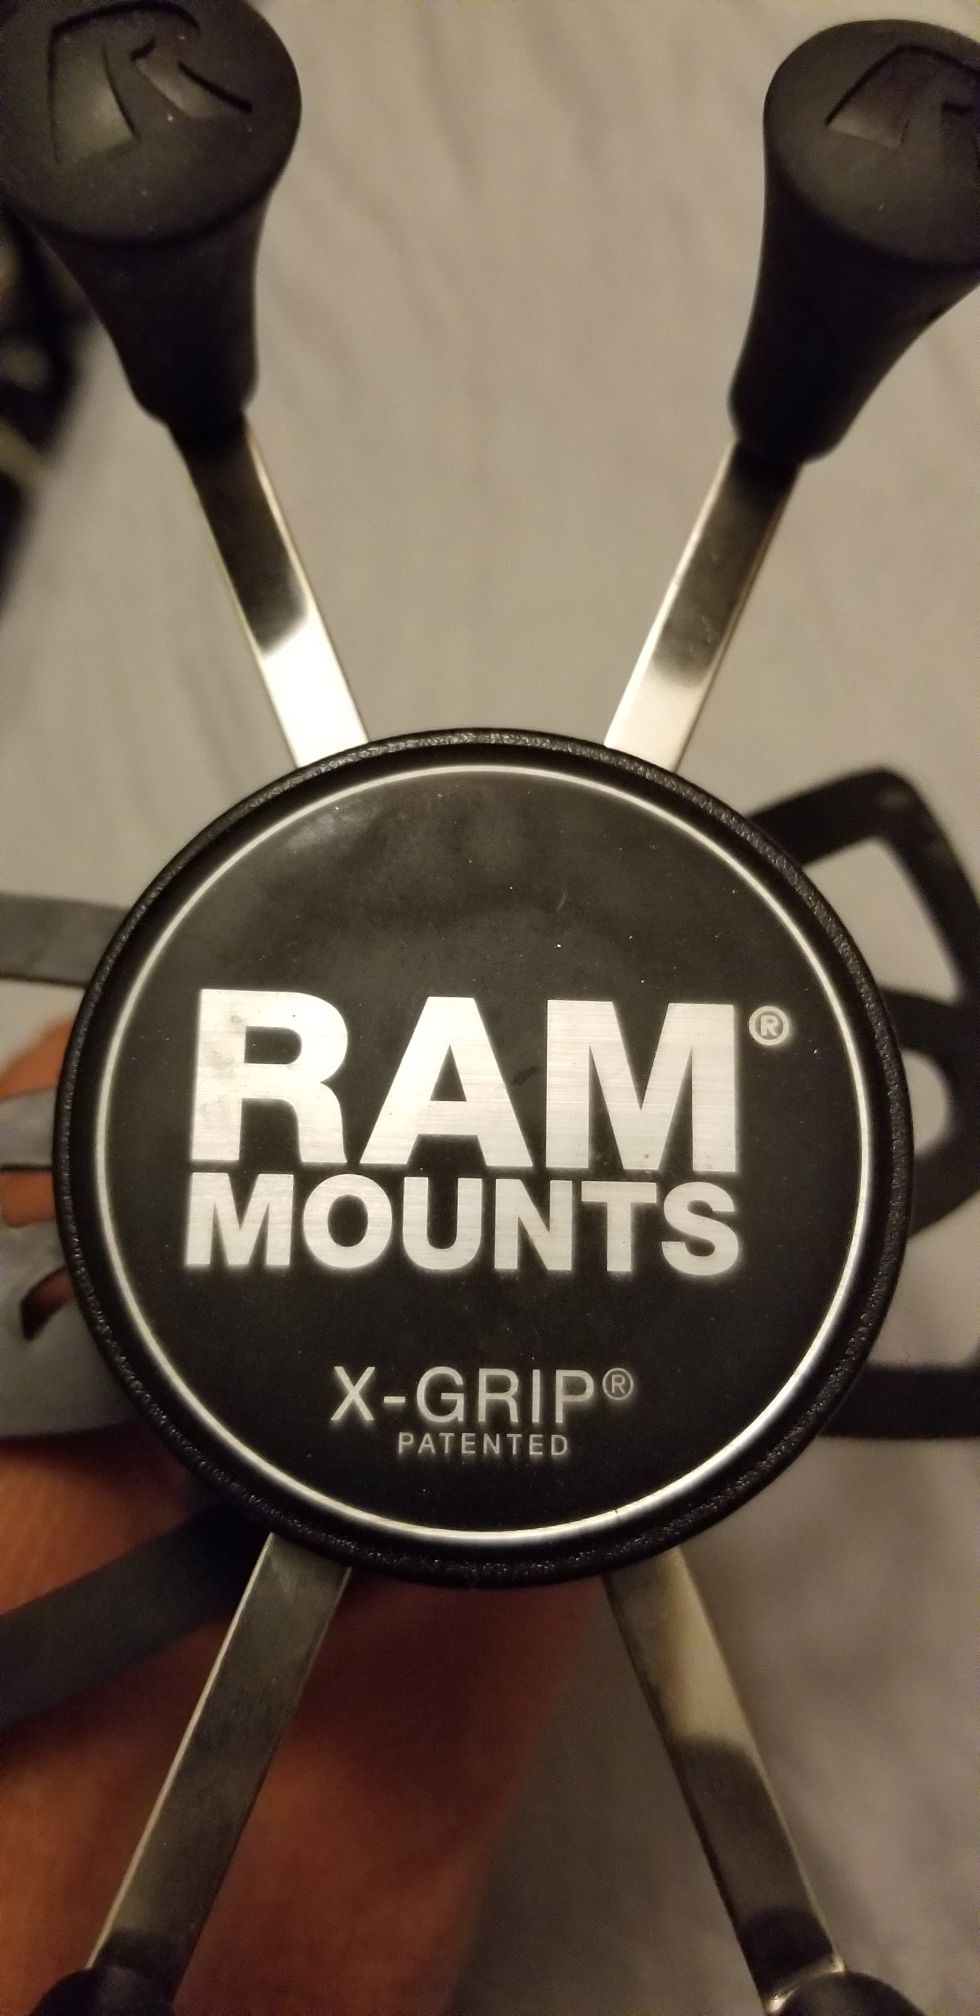 Ram Mounts X-grip with strap for motorcycles